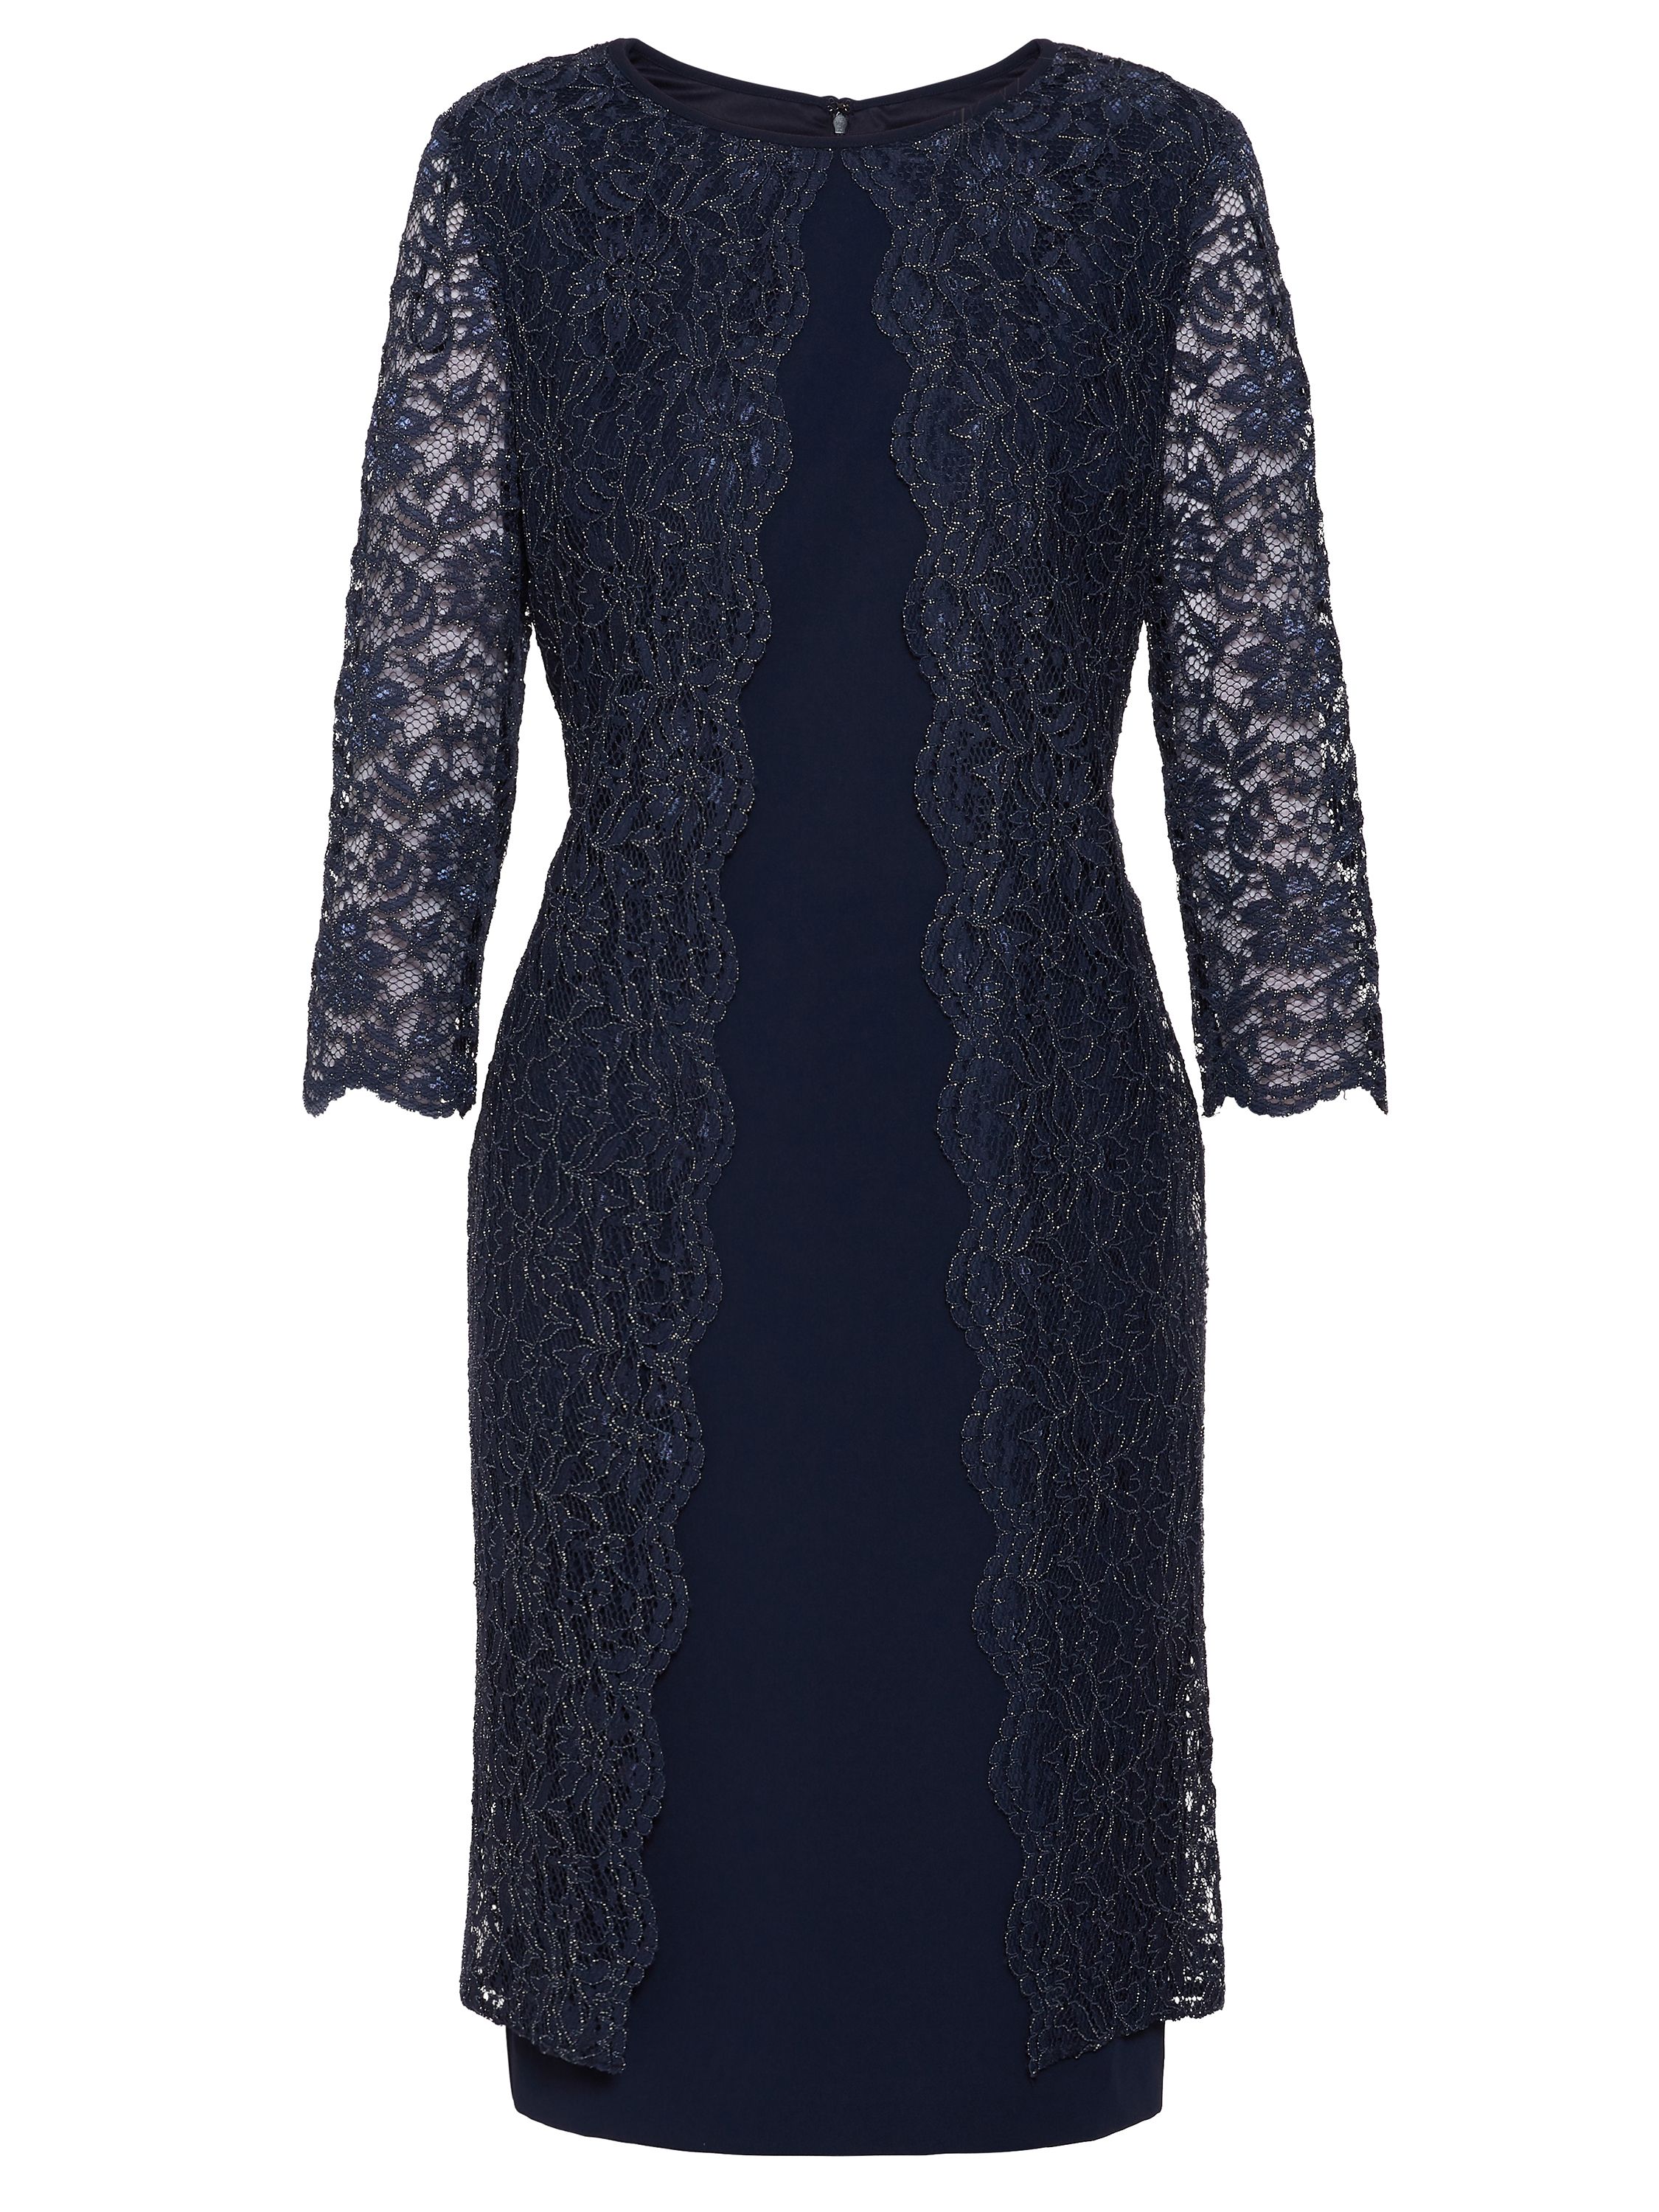 Gina Bacconi presents its stunning crepe and lace dress. This perfect occasionwear piece is comprised of a classic shift dress overlaid with a luxurious stretch lace. The lace features a scallop lace which adorns the front of the dress and the sleeve edge.The dress is fully lined and fastens using a concealed back zip.